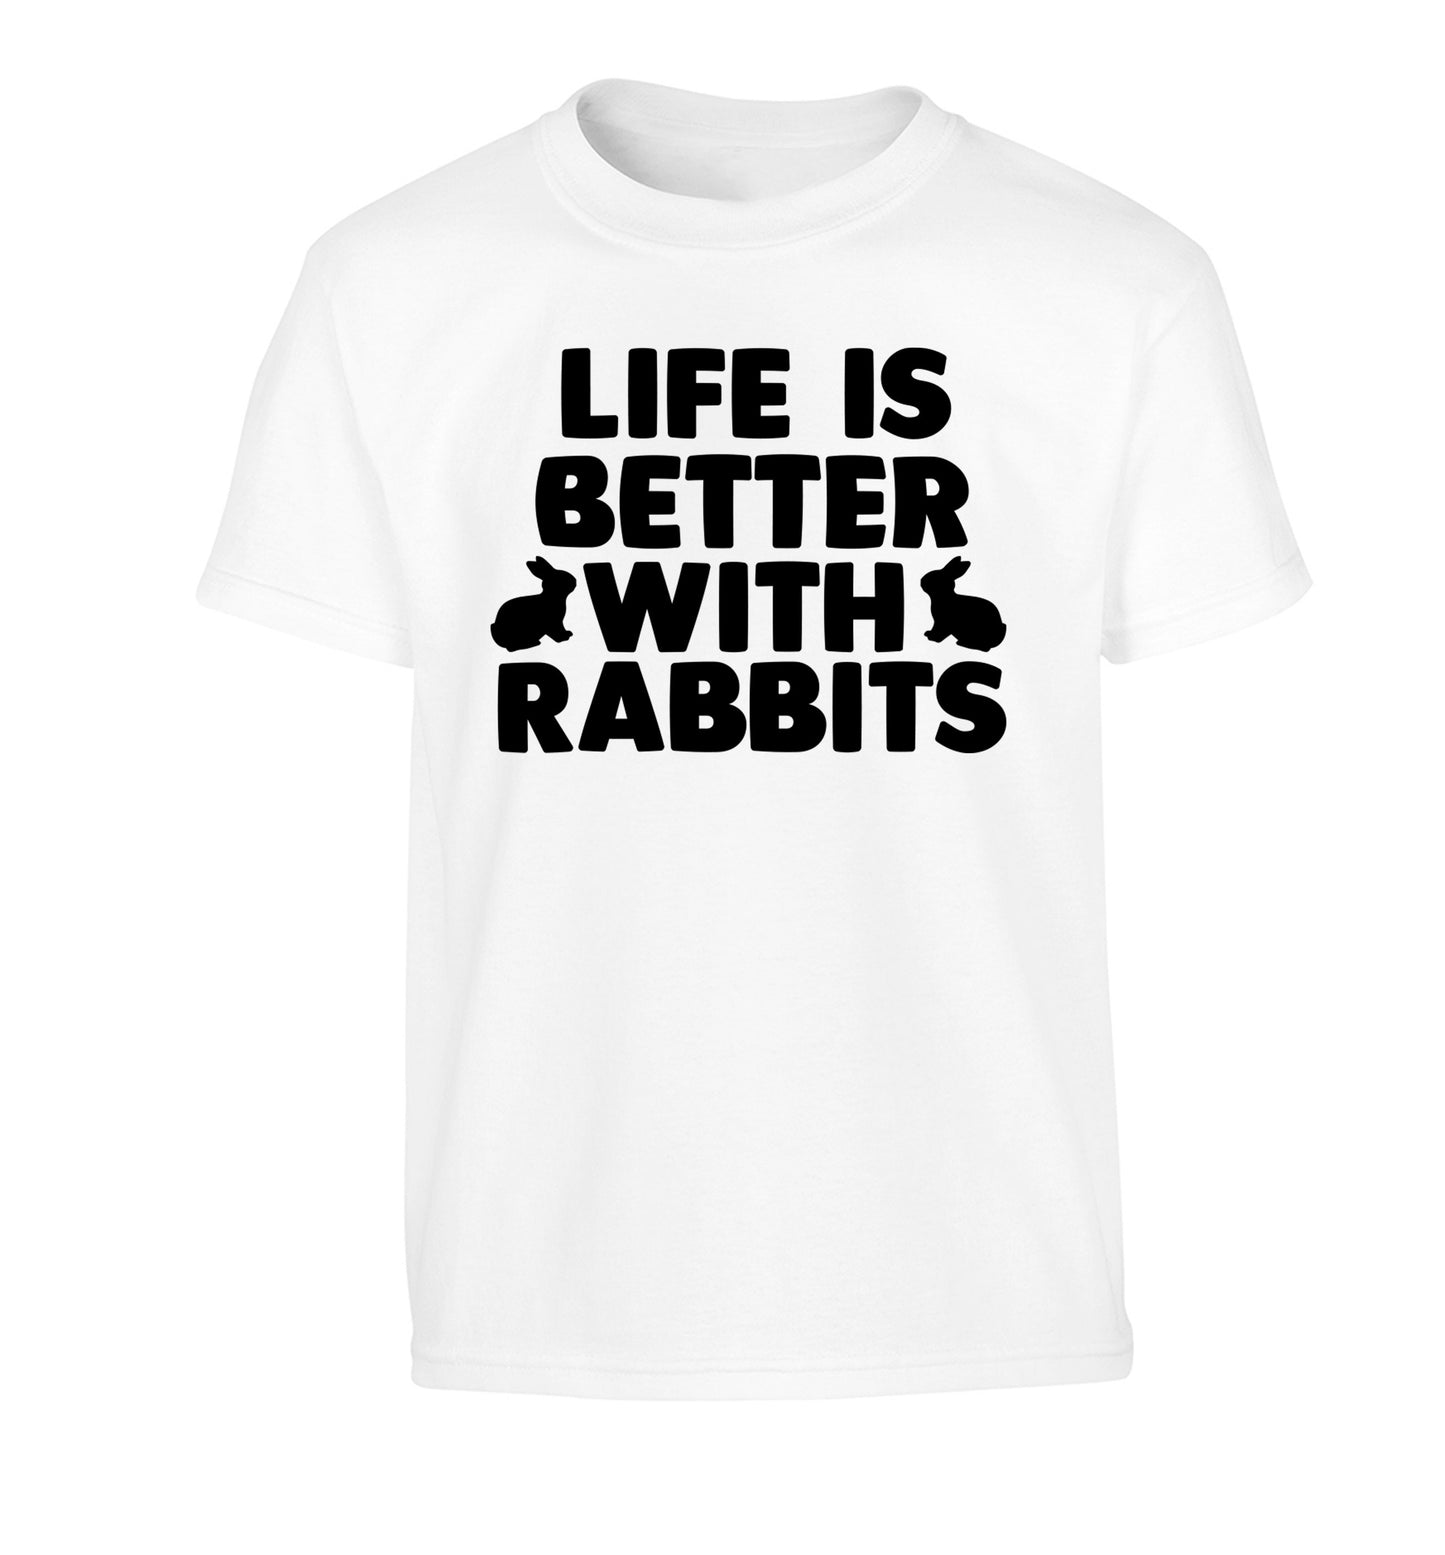 Life is better with rabbits Children's white Tshirt 12-14 Years